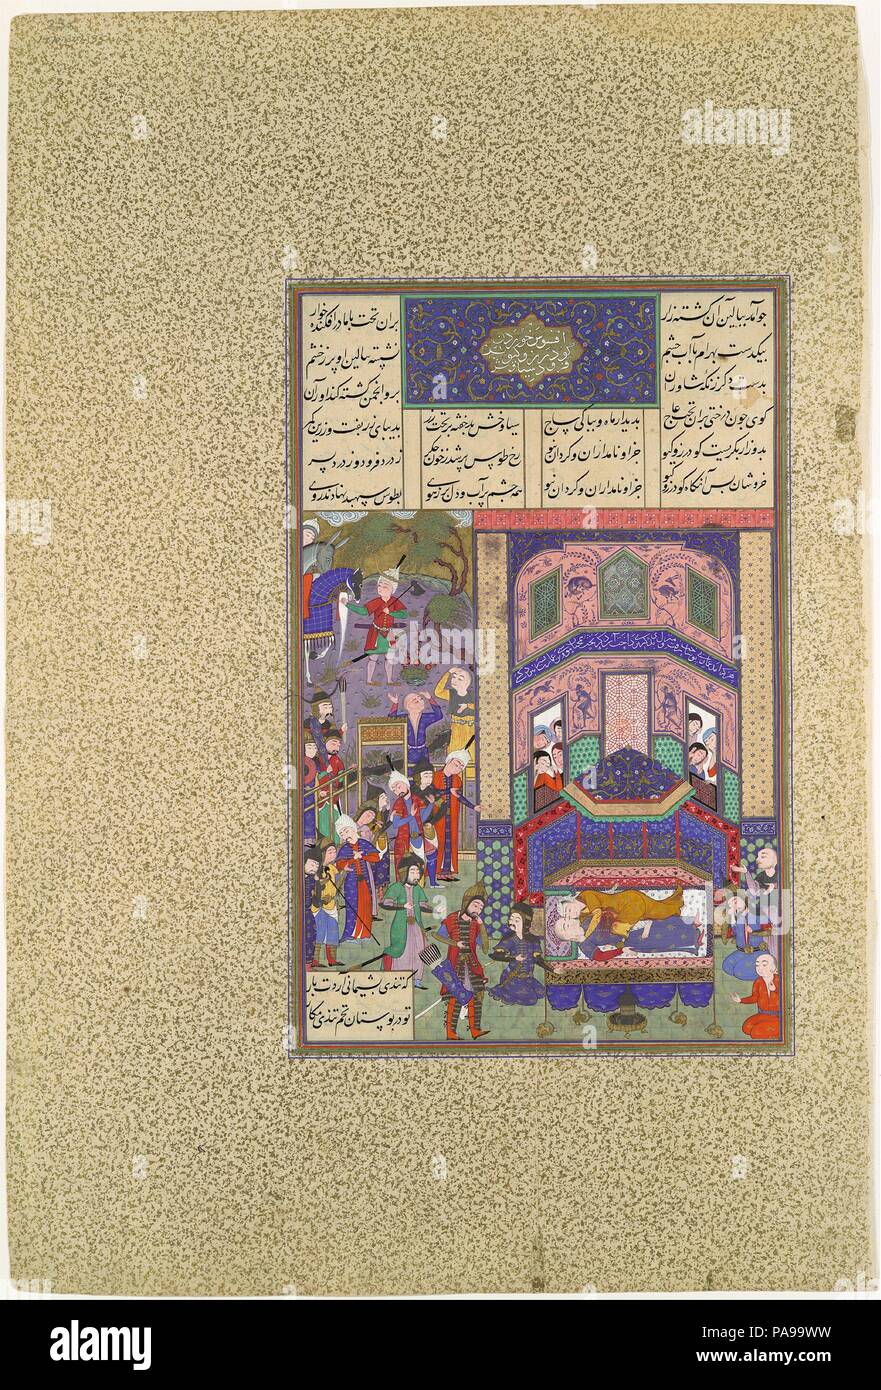 'The Iranians Mourn Farud and Jarira', Folio 236r from the Shahnama (Book of Kings) of Shah Tahmasp. Artist: Painting attributed to 'Abd al-'Aziz (active first half 16th century); Painting attributed to Mirza Muhammad Qabahat. Author: Abu'l Qasim Firdausi (935-1020). Dimensions: Painting: H. 11 1/4 x W. 7 5/16 in. (H. 28.6 x W. 18.6 cm)  Entire Page: H. 18 5/8 x W. 12 1/2 in. (H. 47.3 x W. 31.8 cm). Date: ca. 1525-30.  The Shahnama is filled with tragic events and moments of intense drama. On the page illustrated here, the painters have depicted the mourning of Iranians over the tragic destiny Stock Photo